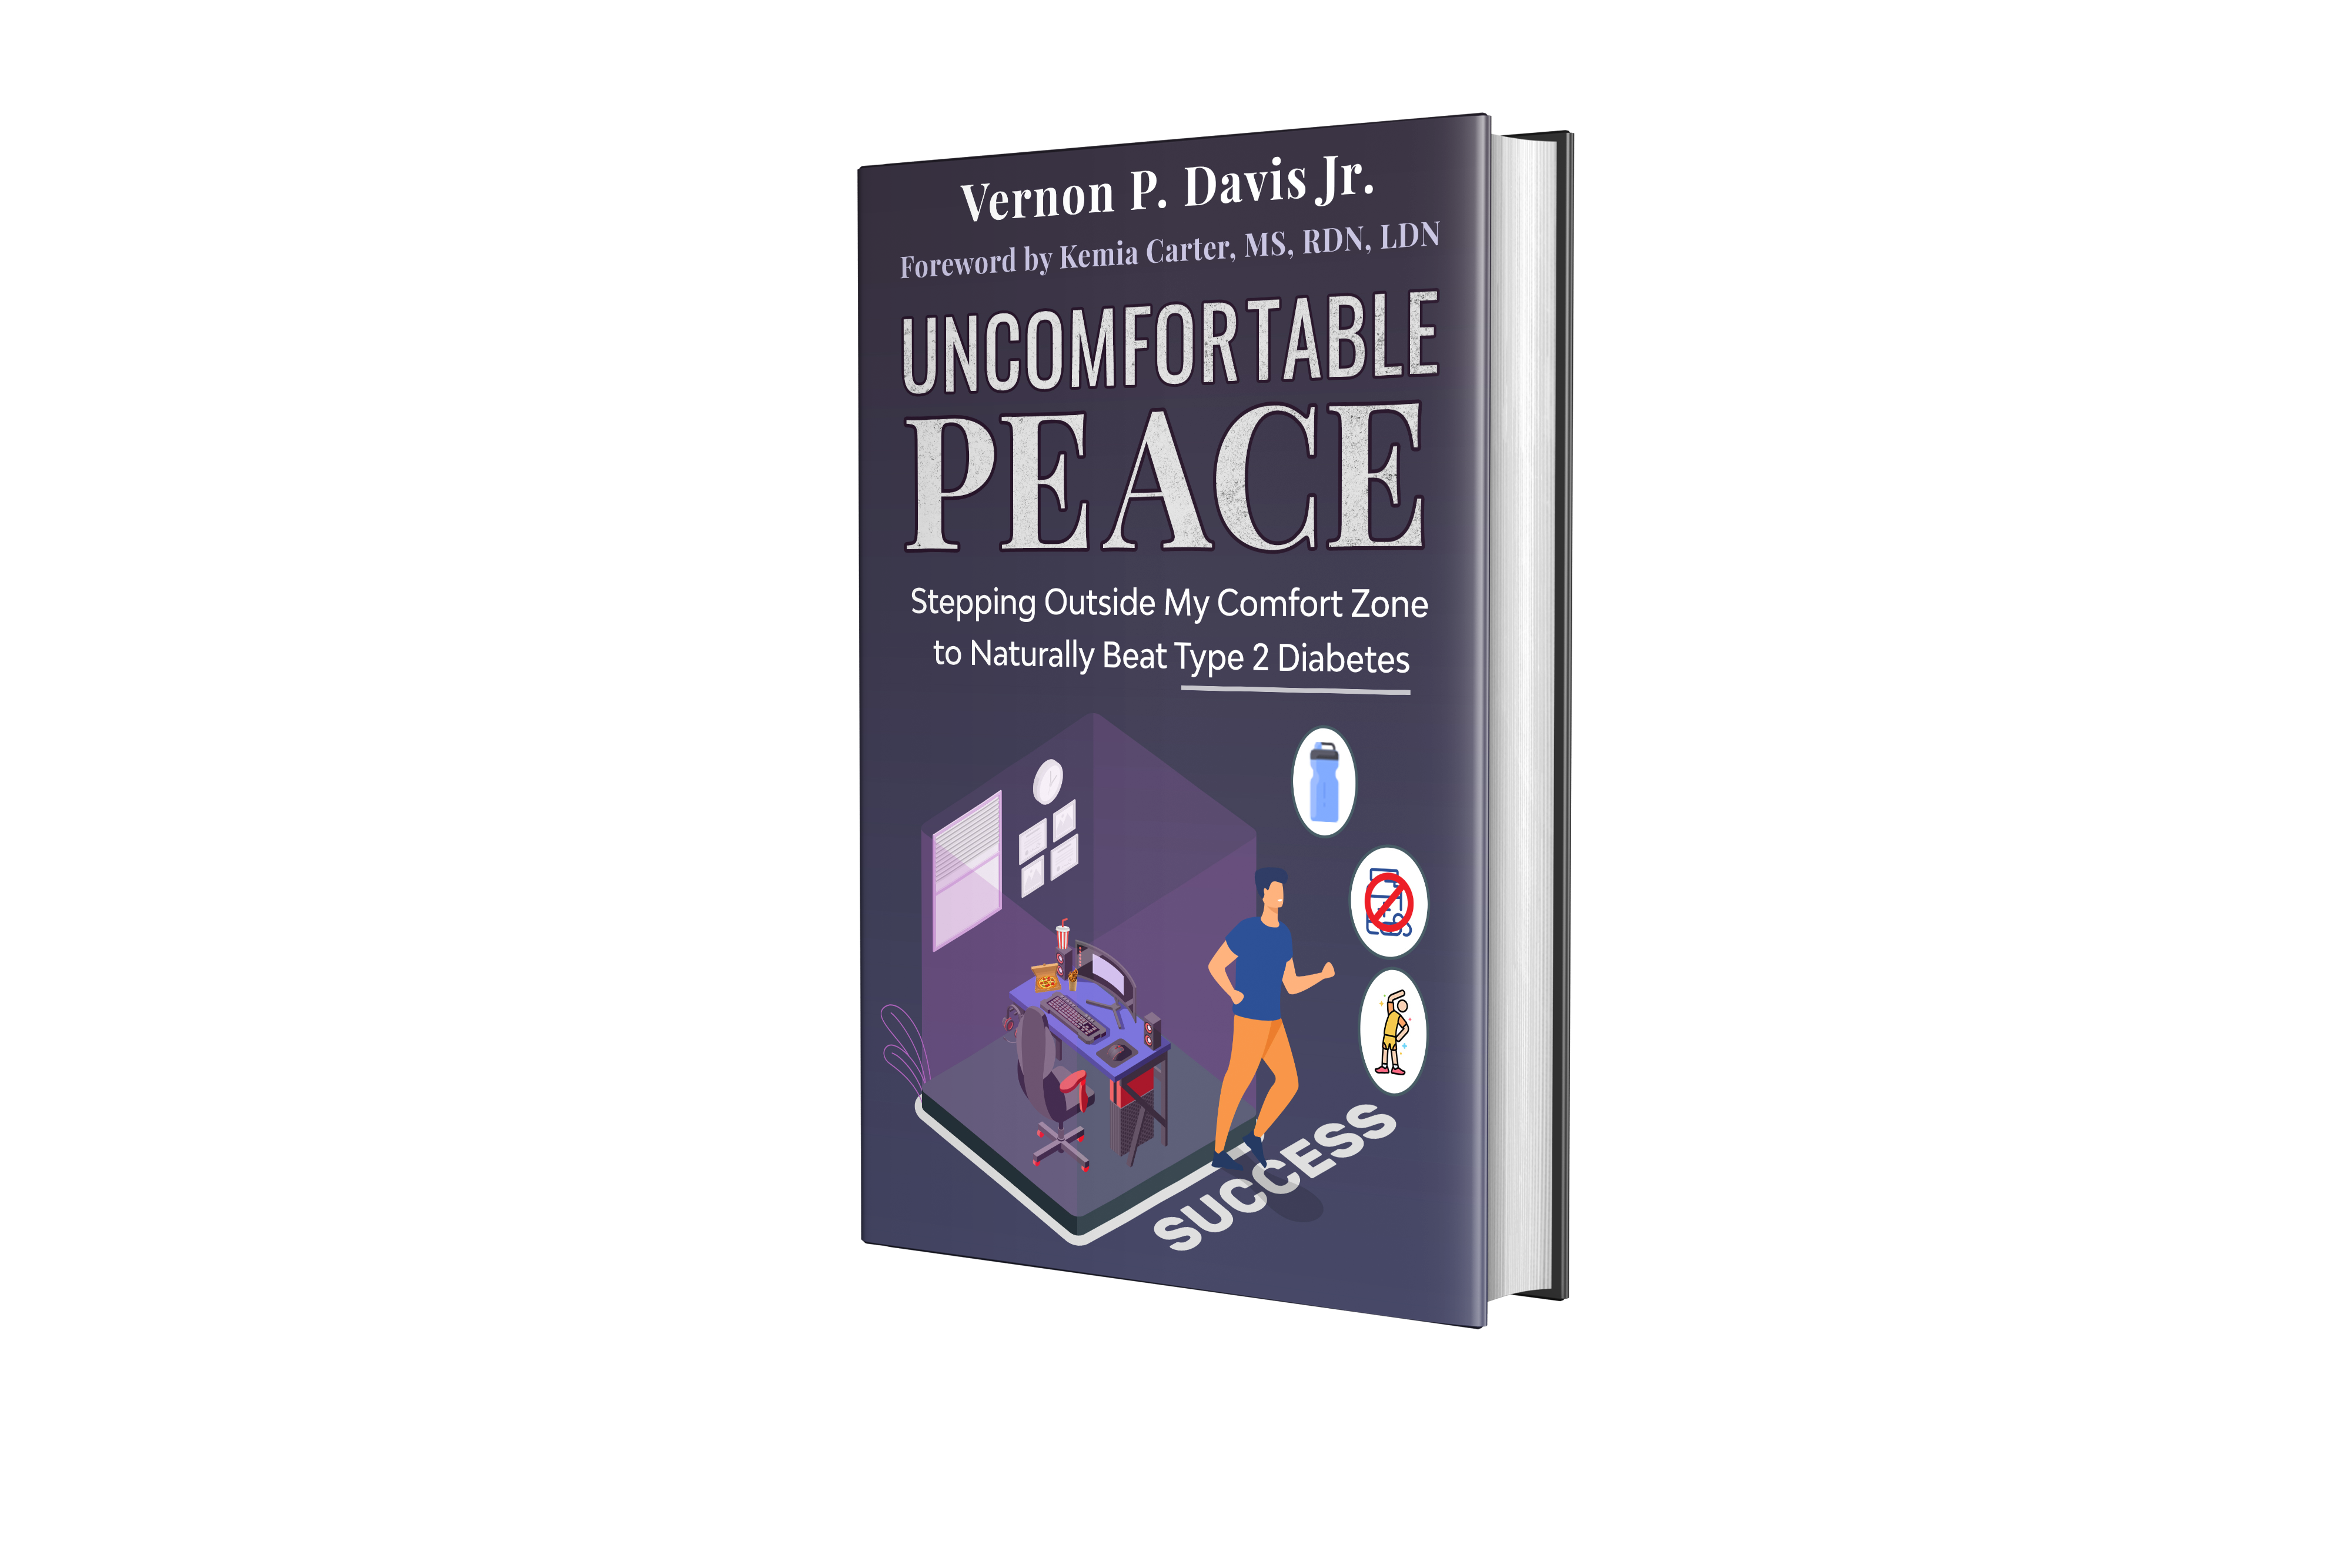 Do you have type 2 diabetes? A1C level over  6.5?  Looking to lose weight after having experienced failed diet attempts? Uncomfortable Peace is the book is for you!